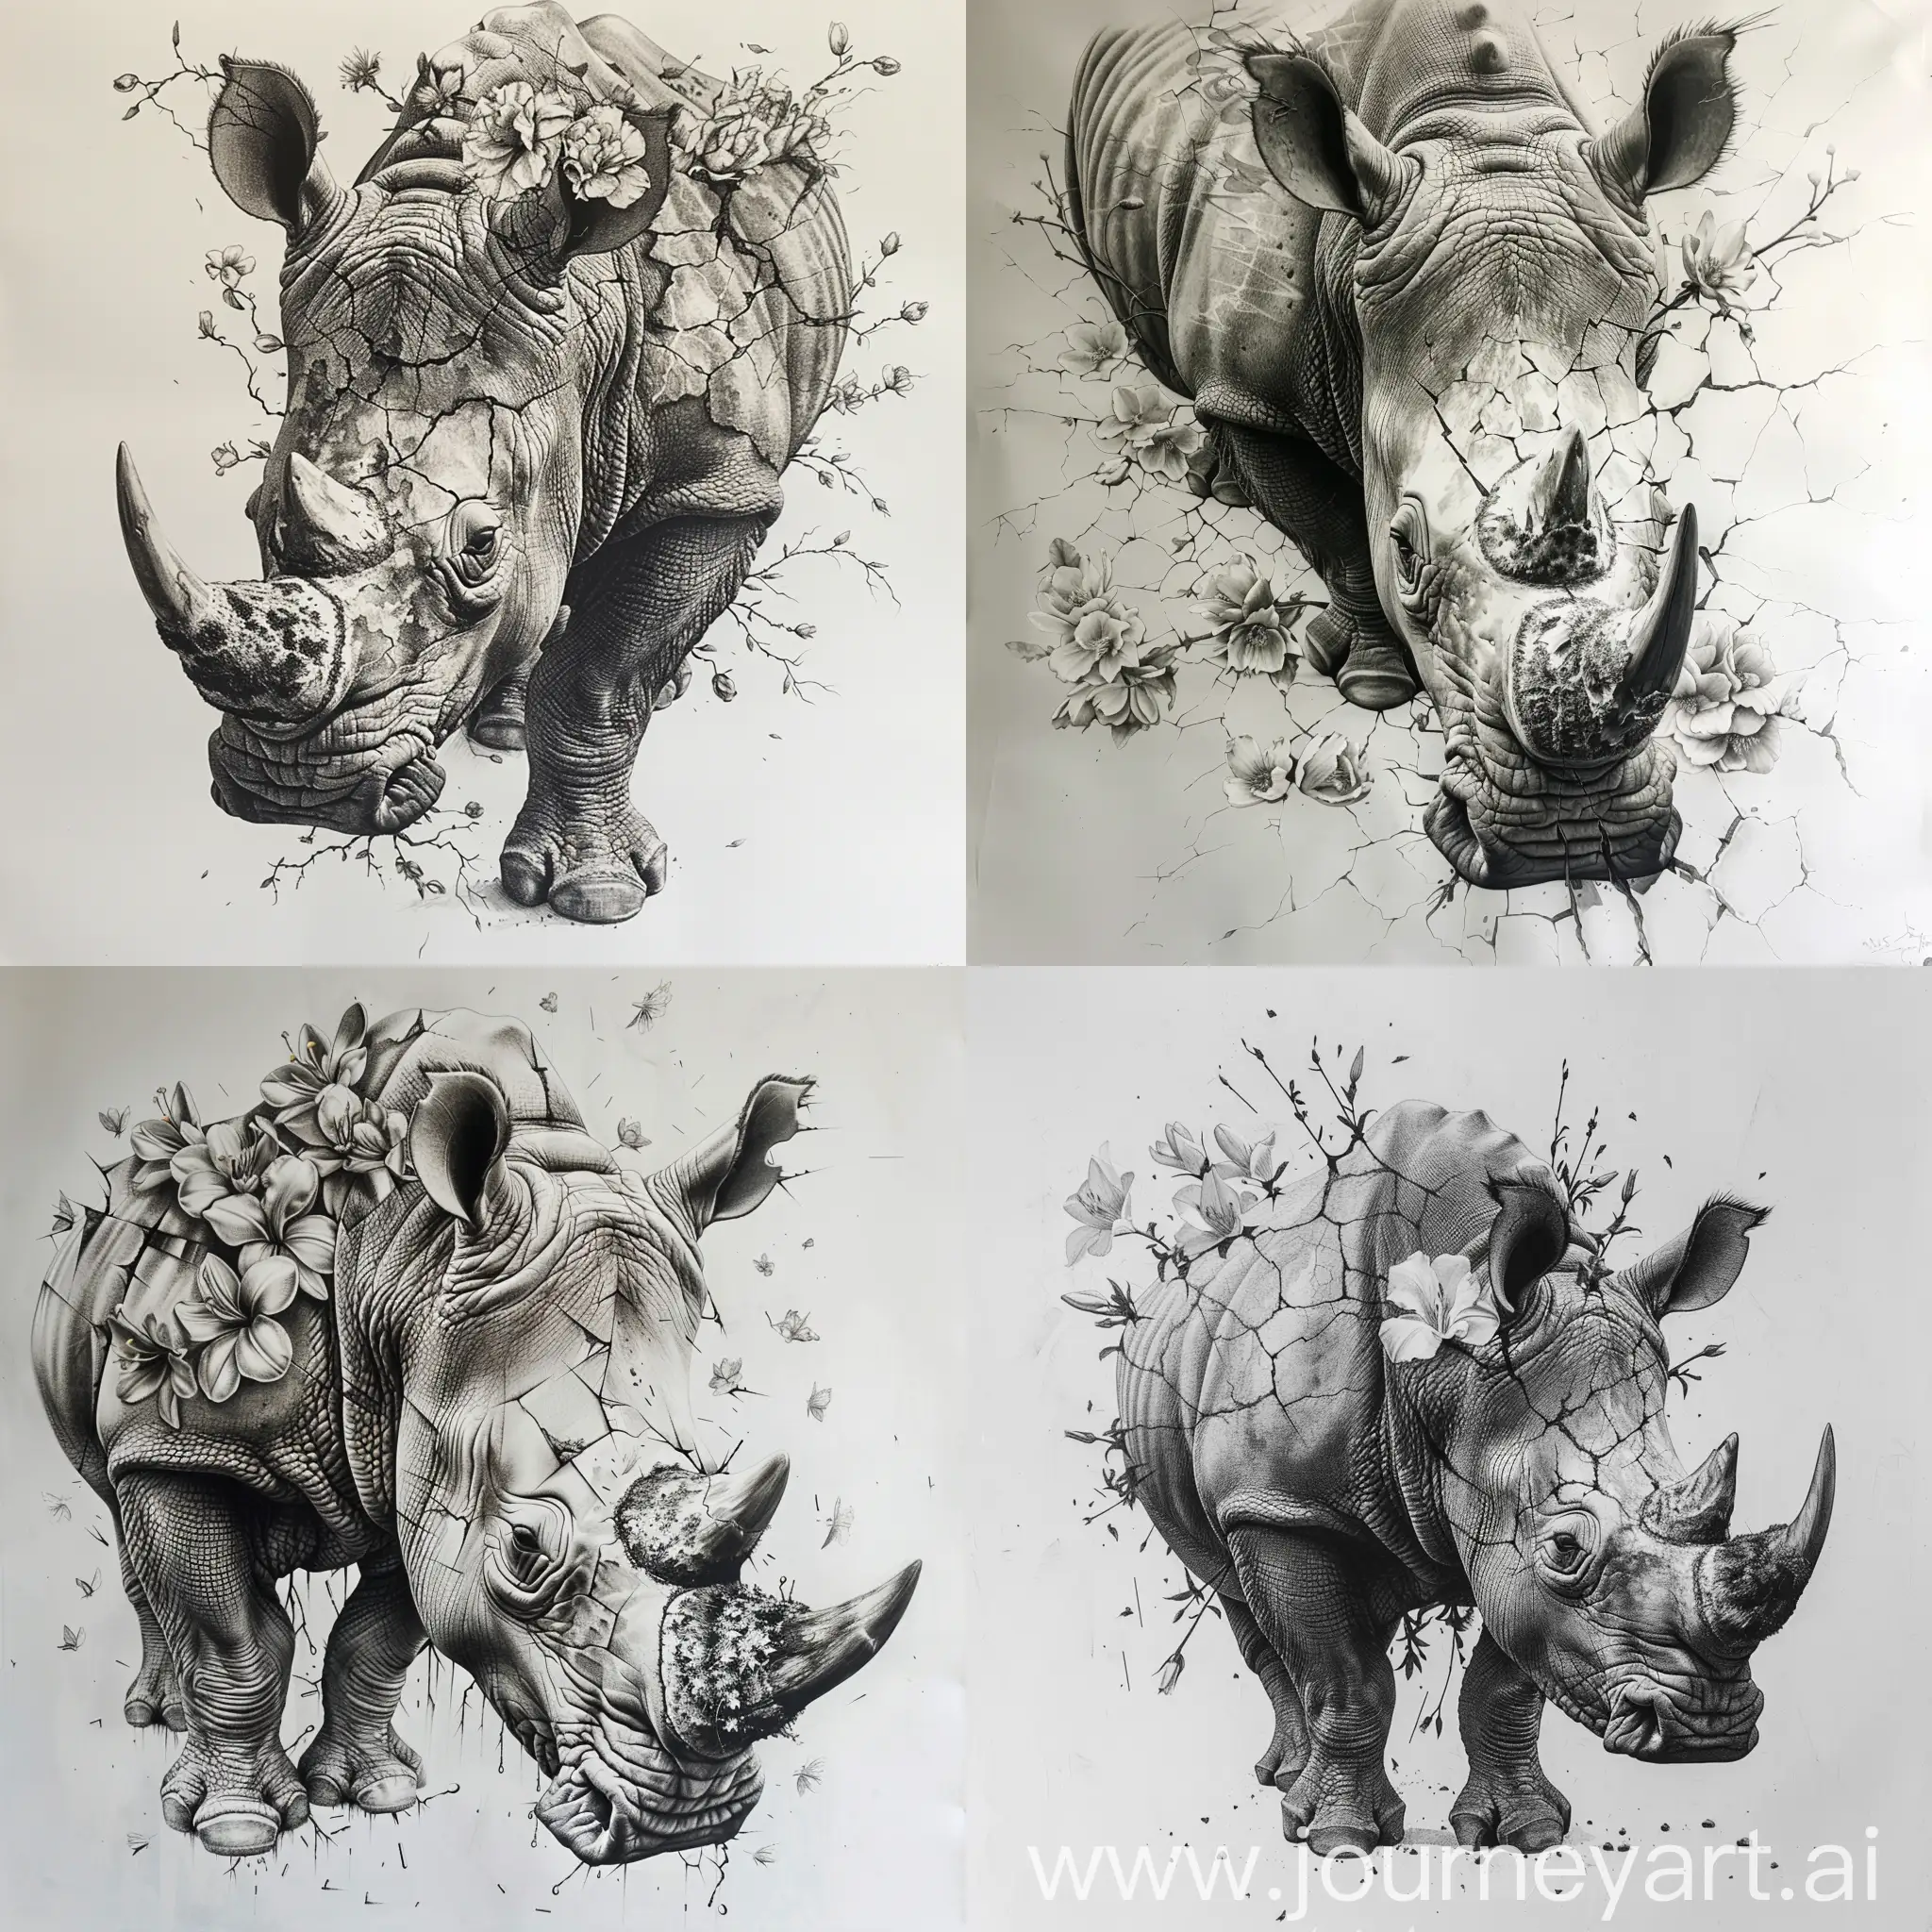 genre creative dark hyper realistic pencil sketch of a rhino on prism like surface, the upper body of the rhino is cracking and from those cracks flowers are growing, on a large canvas in great details with white background
